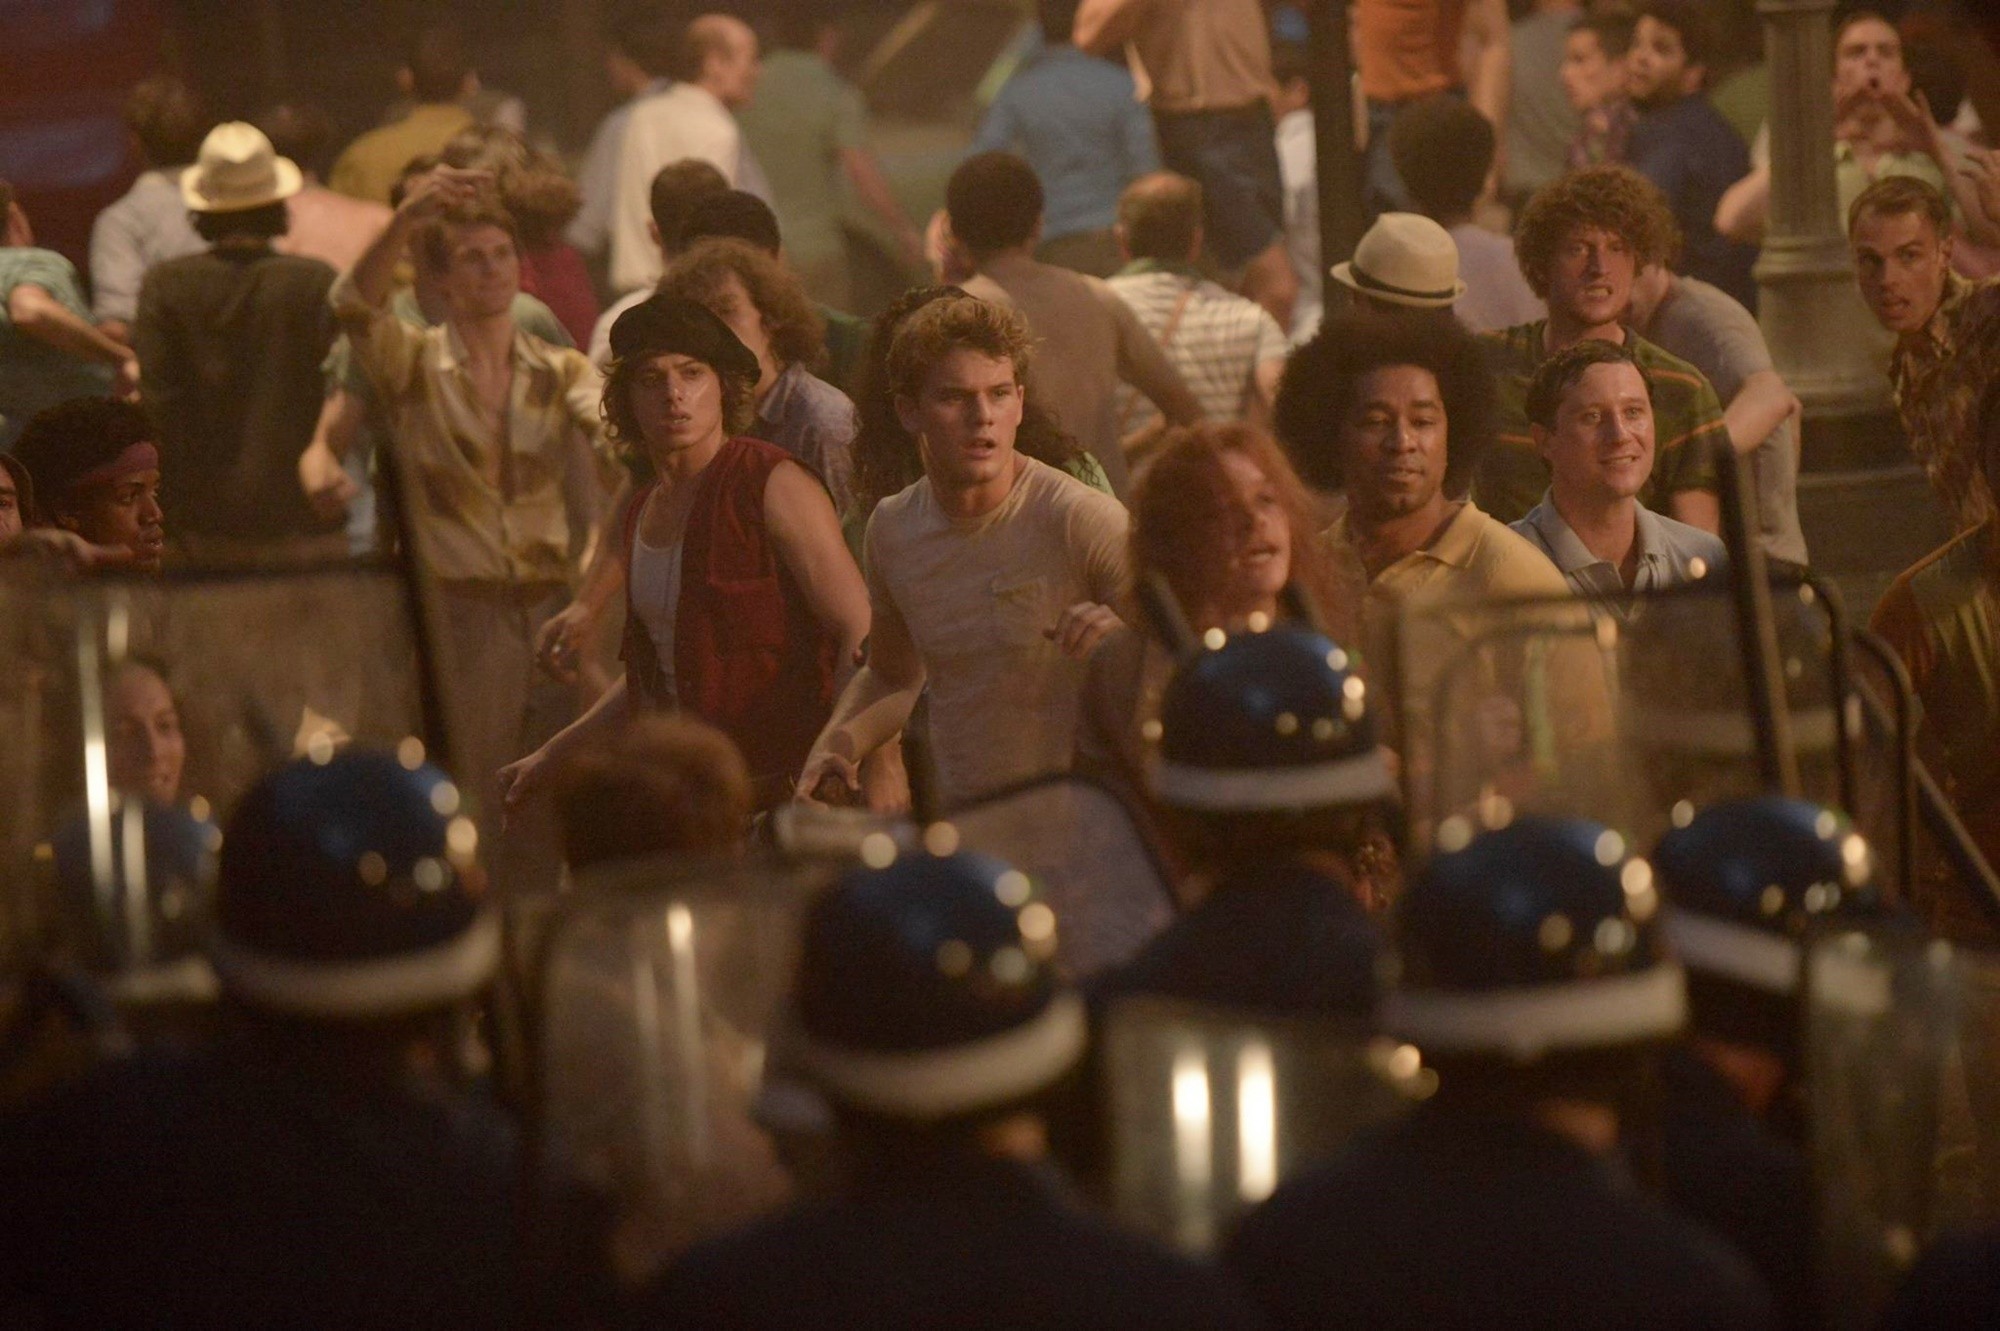 Jeremy Irvine stars as Danny in Roadside Attractions' Stonewall (2015)